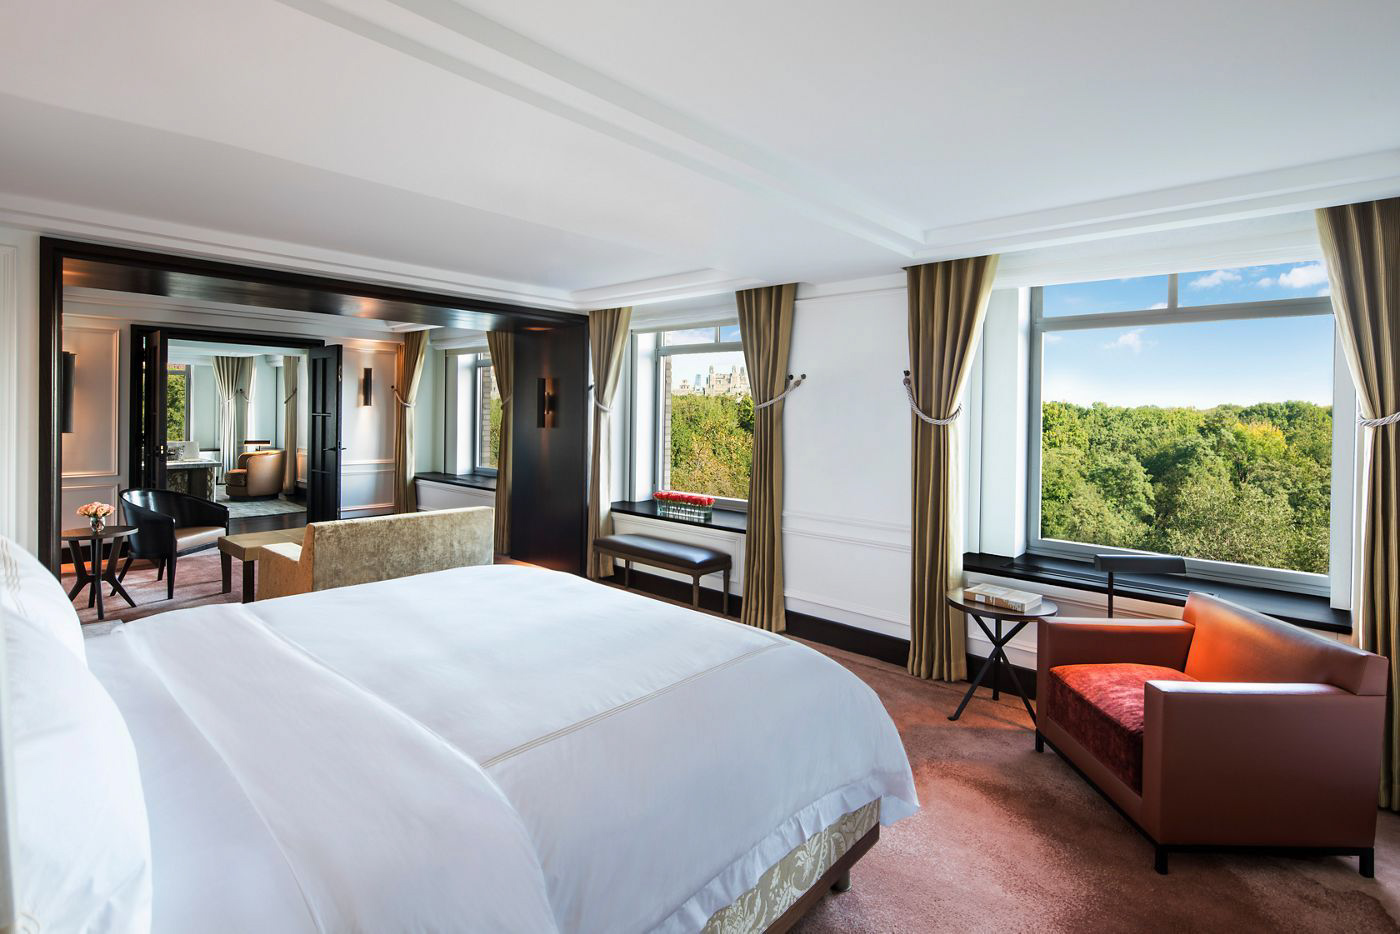 The Ritz-Carlton New York, Central Park Hotel – New York, NY, USA – The Royal Suite Master Bedroom